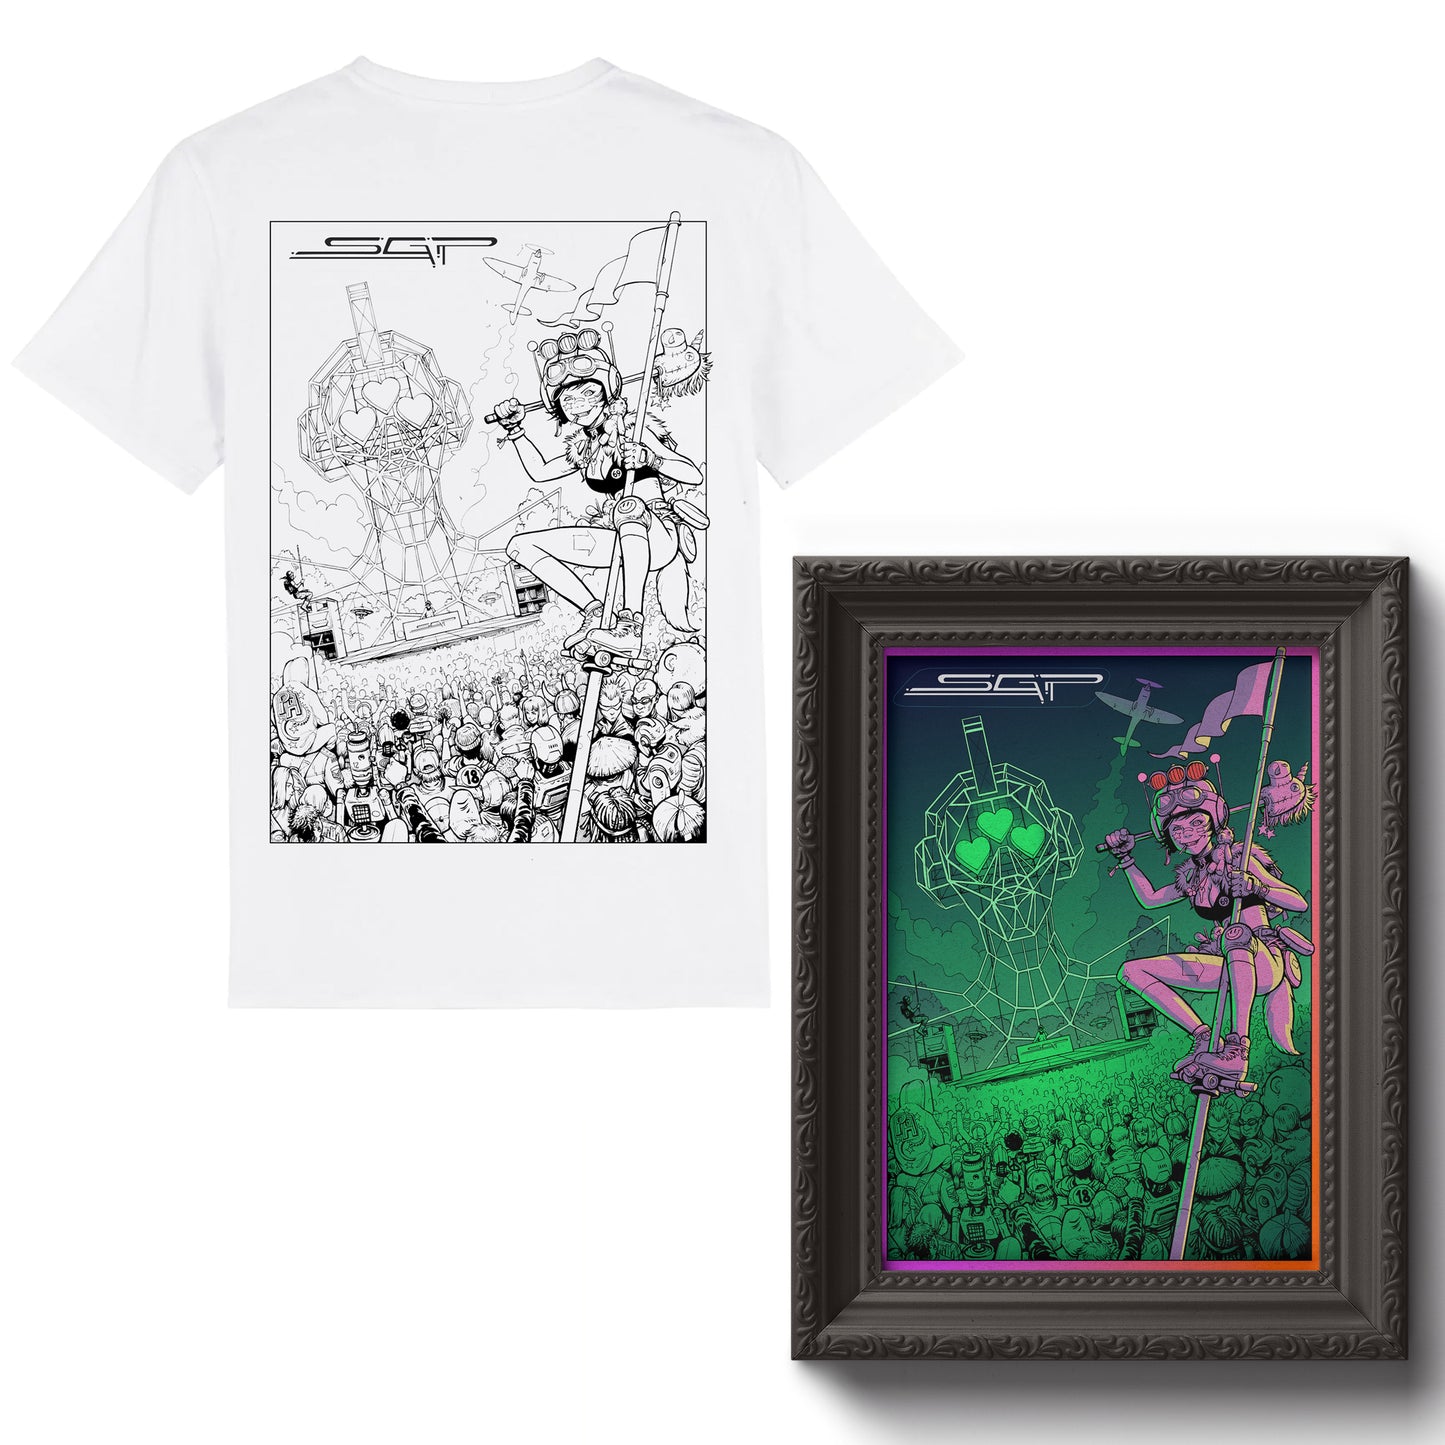 Secret Garden Party x Play Attention - A Stage Ahead T-Shirt & Poster Bundle